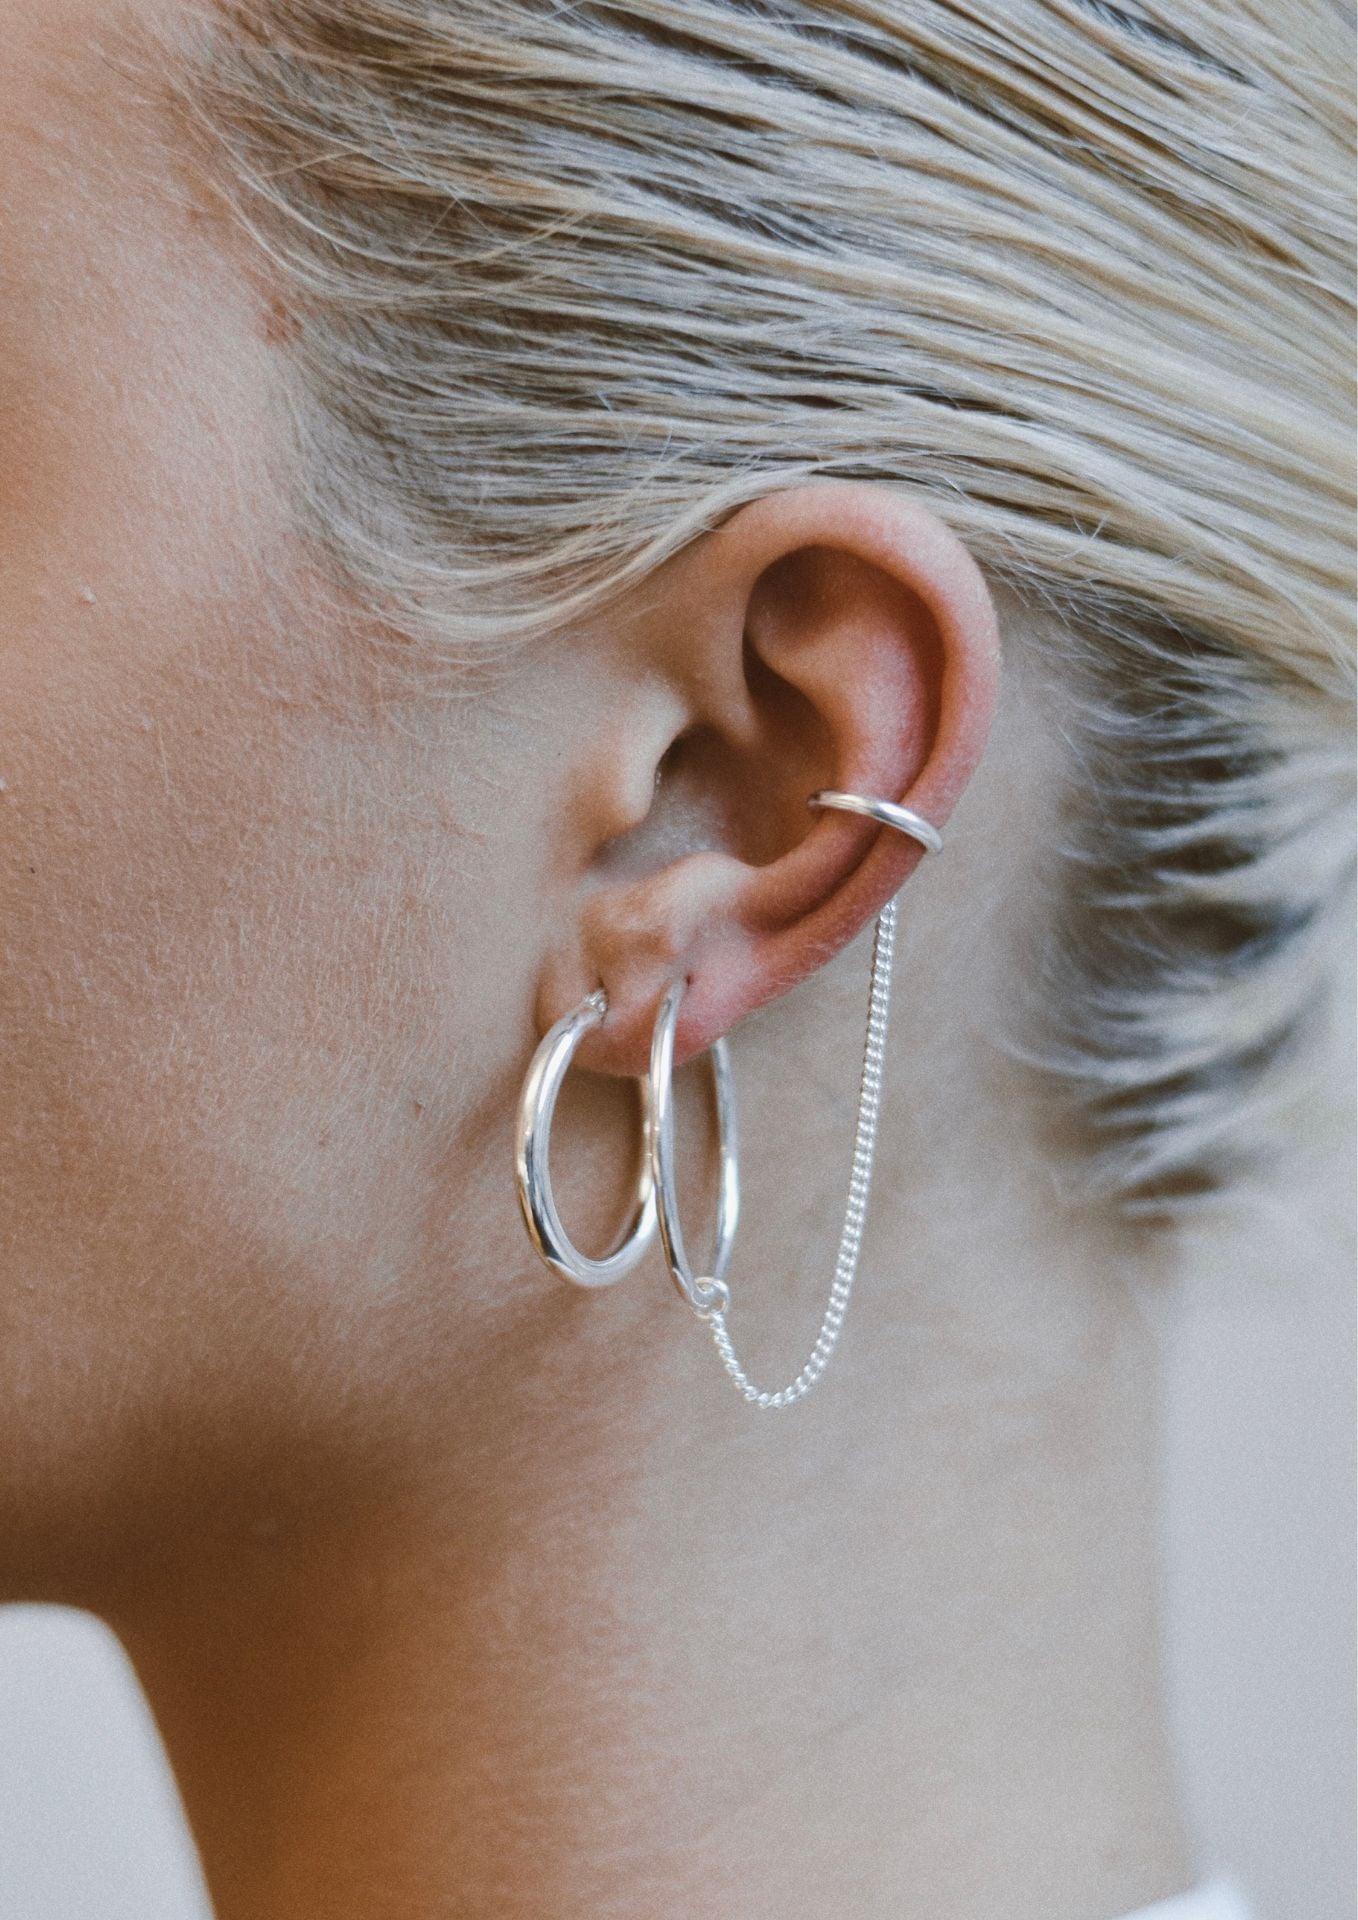 Nomad Hoops and Chained Line ear cuff Combo